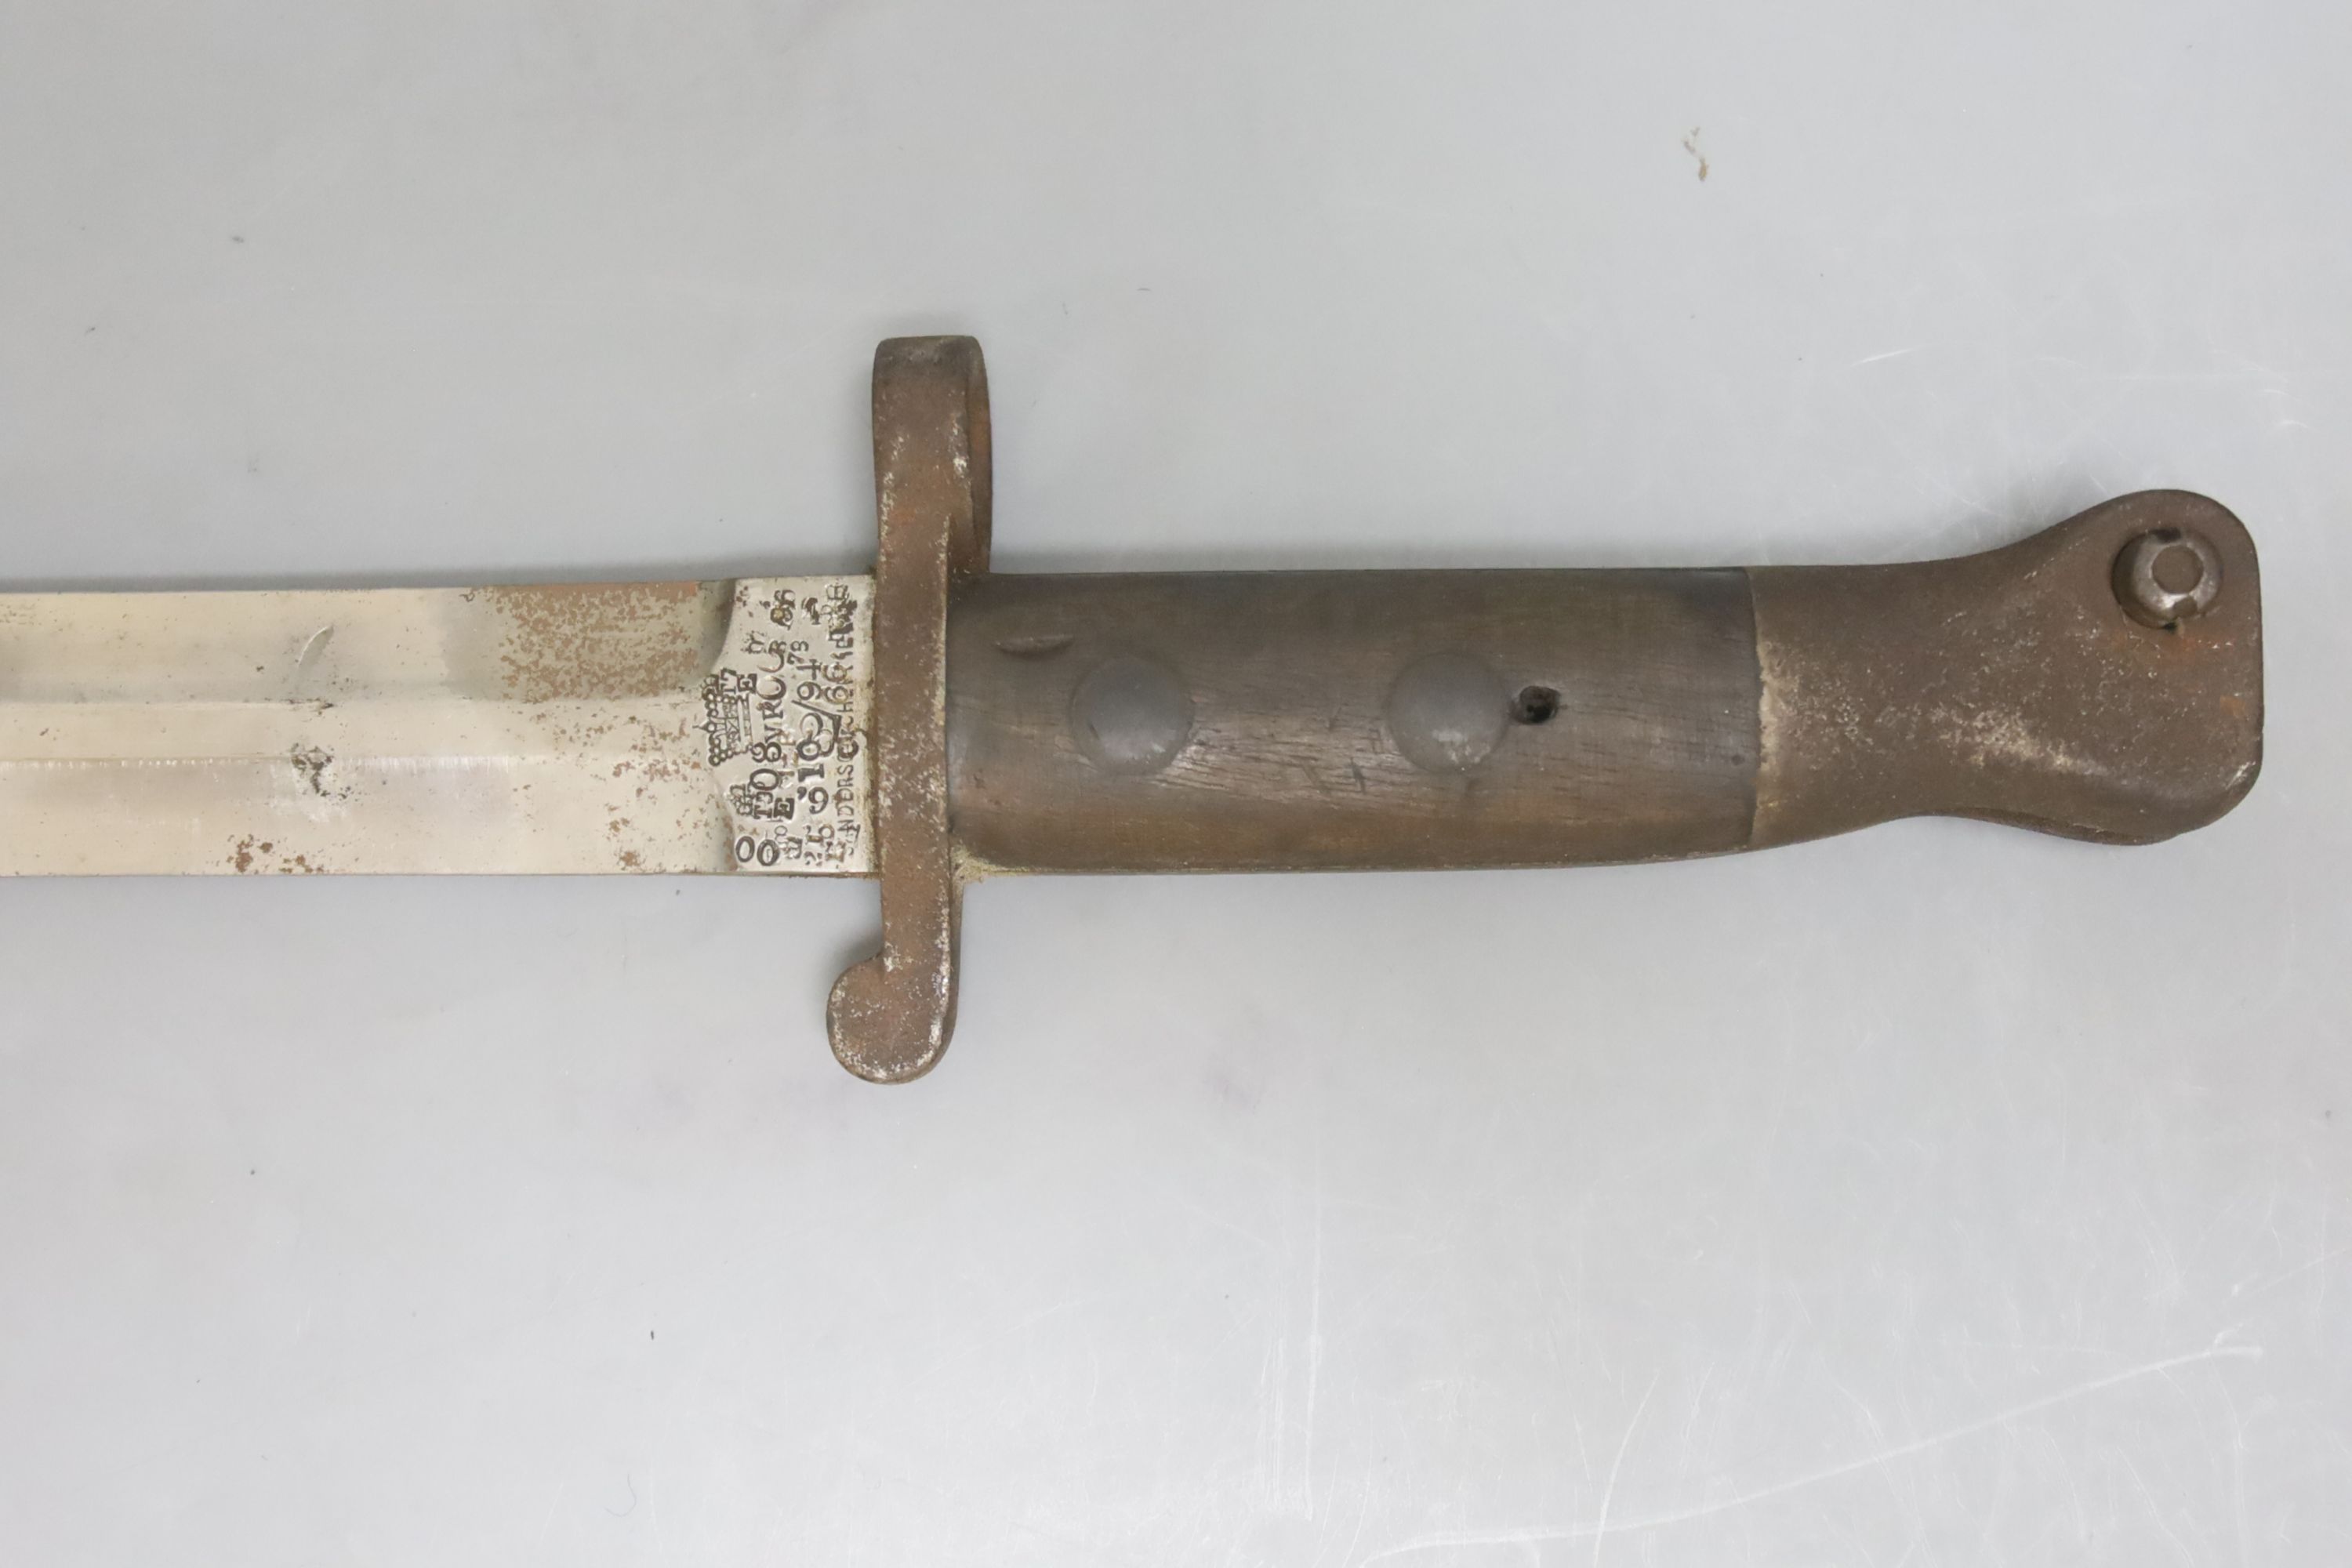 A 19th century French bayonet, together with an early 20th century English bayonet and a ‘Remember The Alamo 1836 The Stand of Colonel Jim' Bowie knife